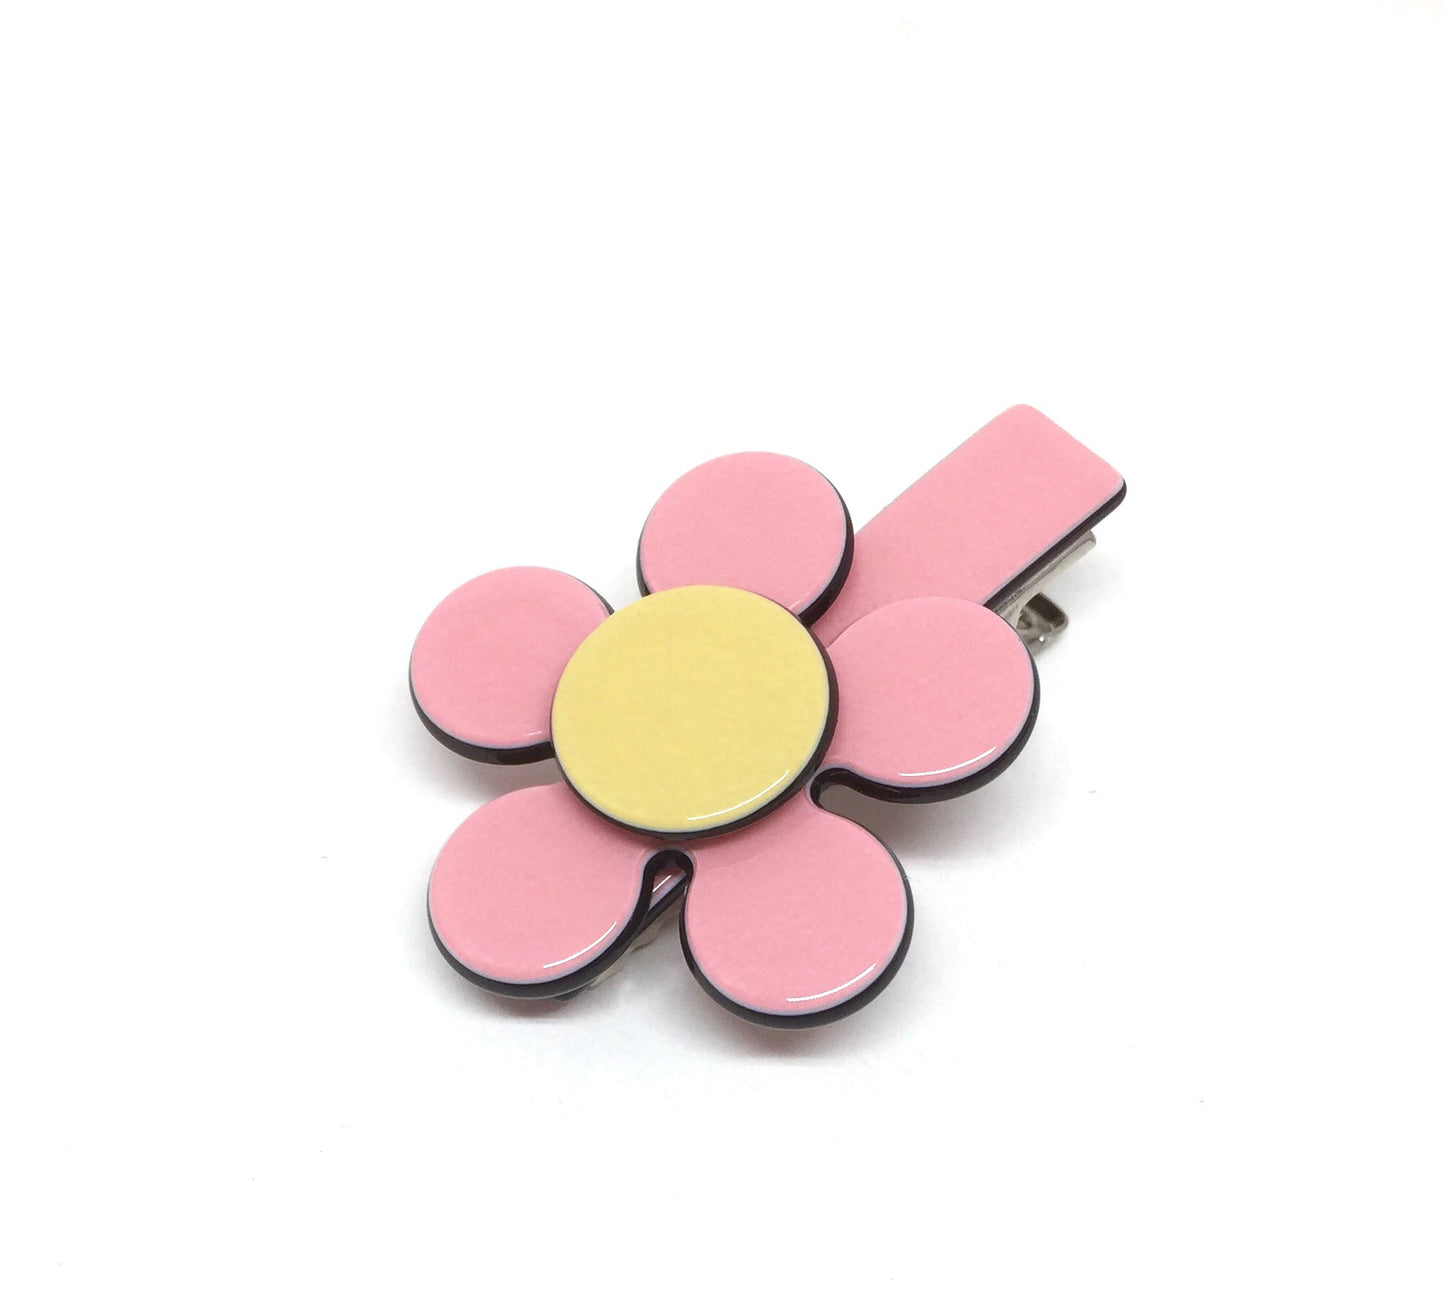 Daisy flower - Small - soft pink